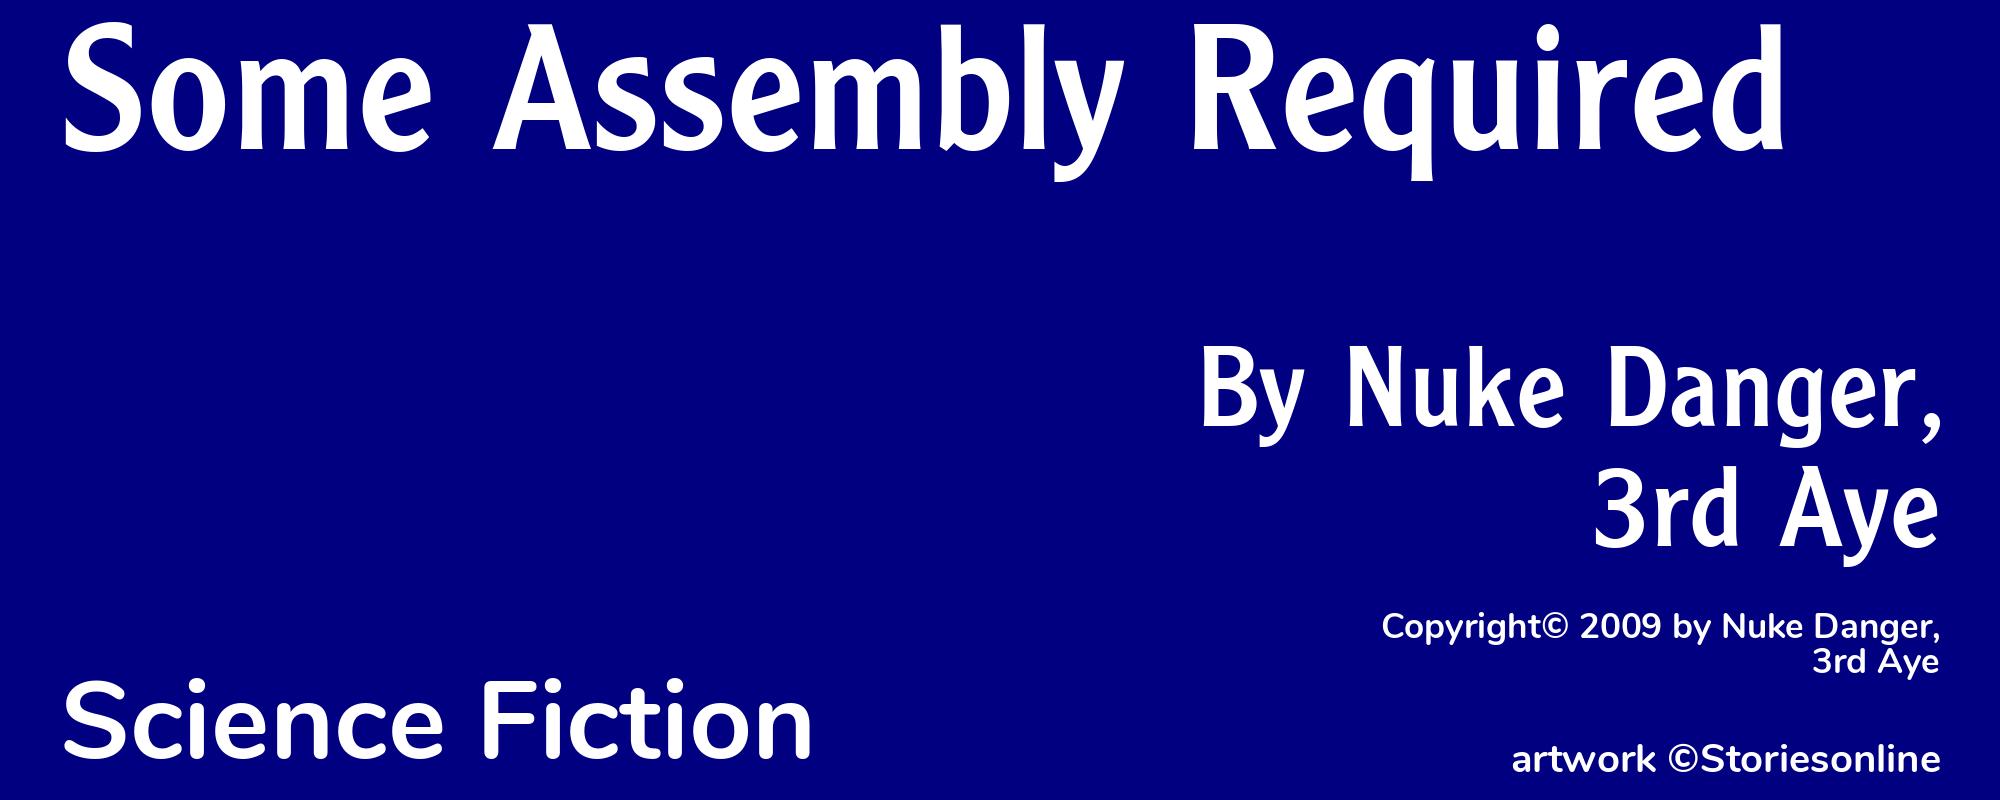 Some Assembly Required - Cover